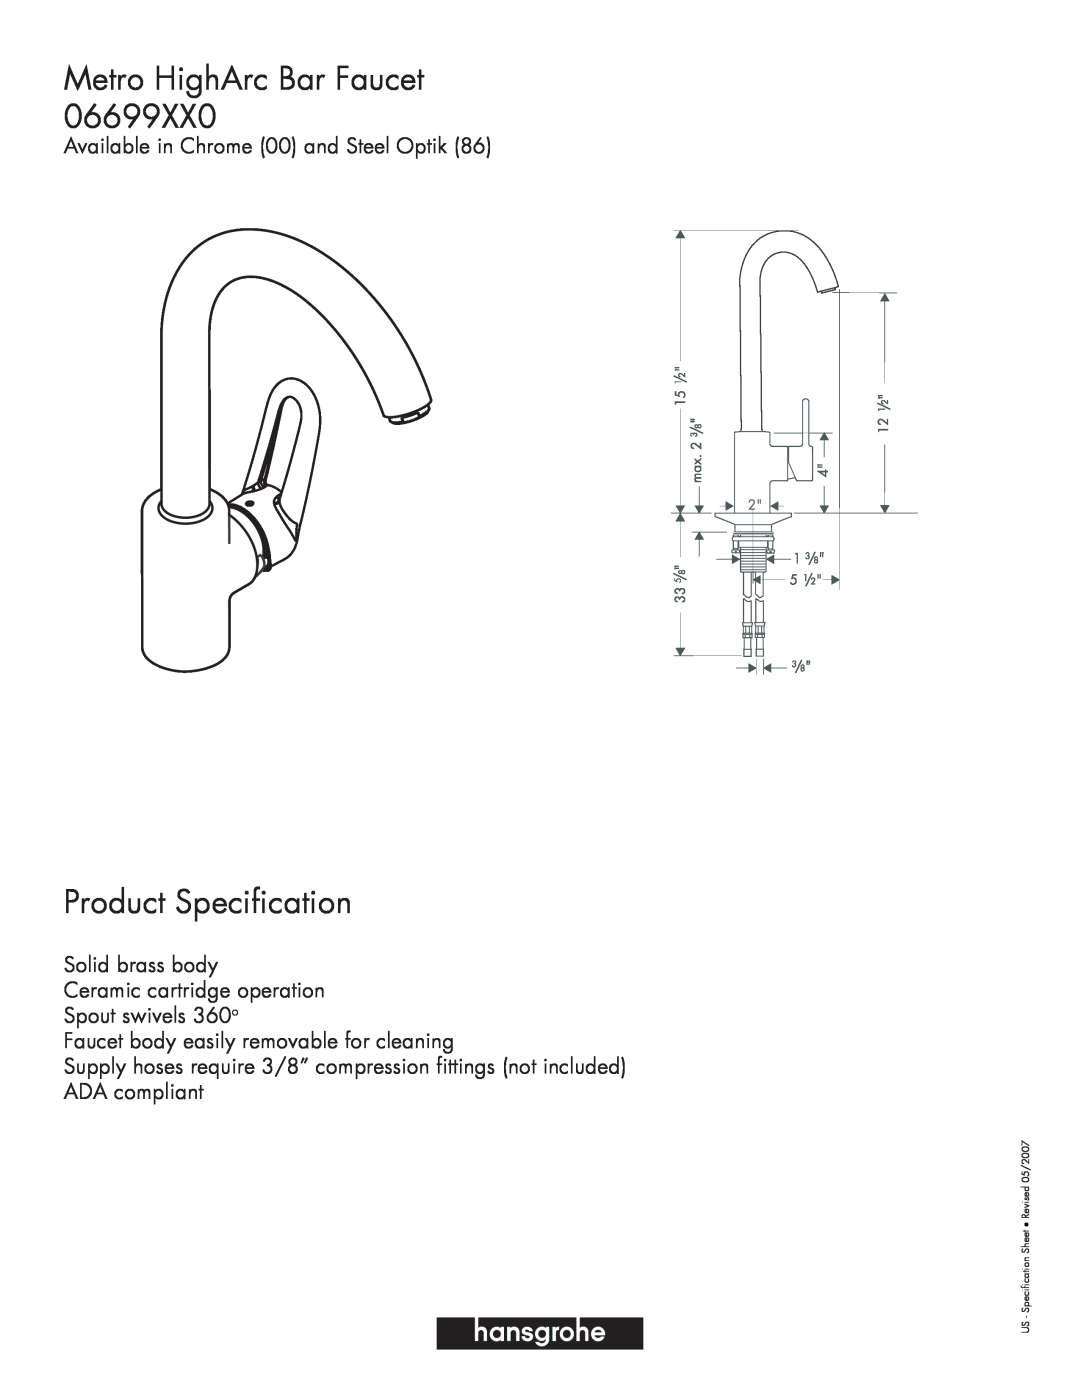 Hans Grohe 06699XX0 specifications Metro HighArc Bar Faucet, Product Specification, Available in Chrome 00 and Steel Optik 